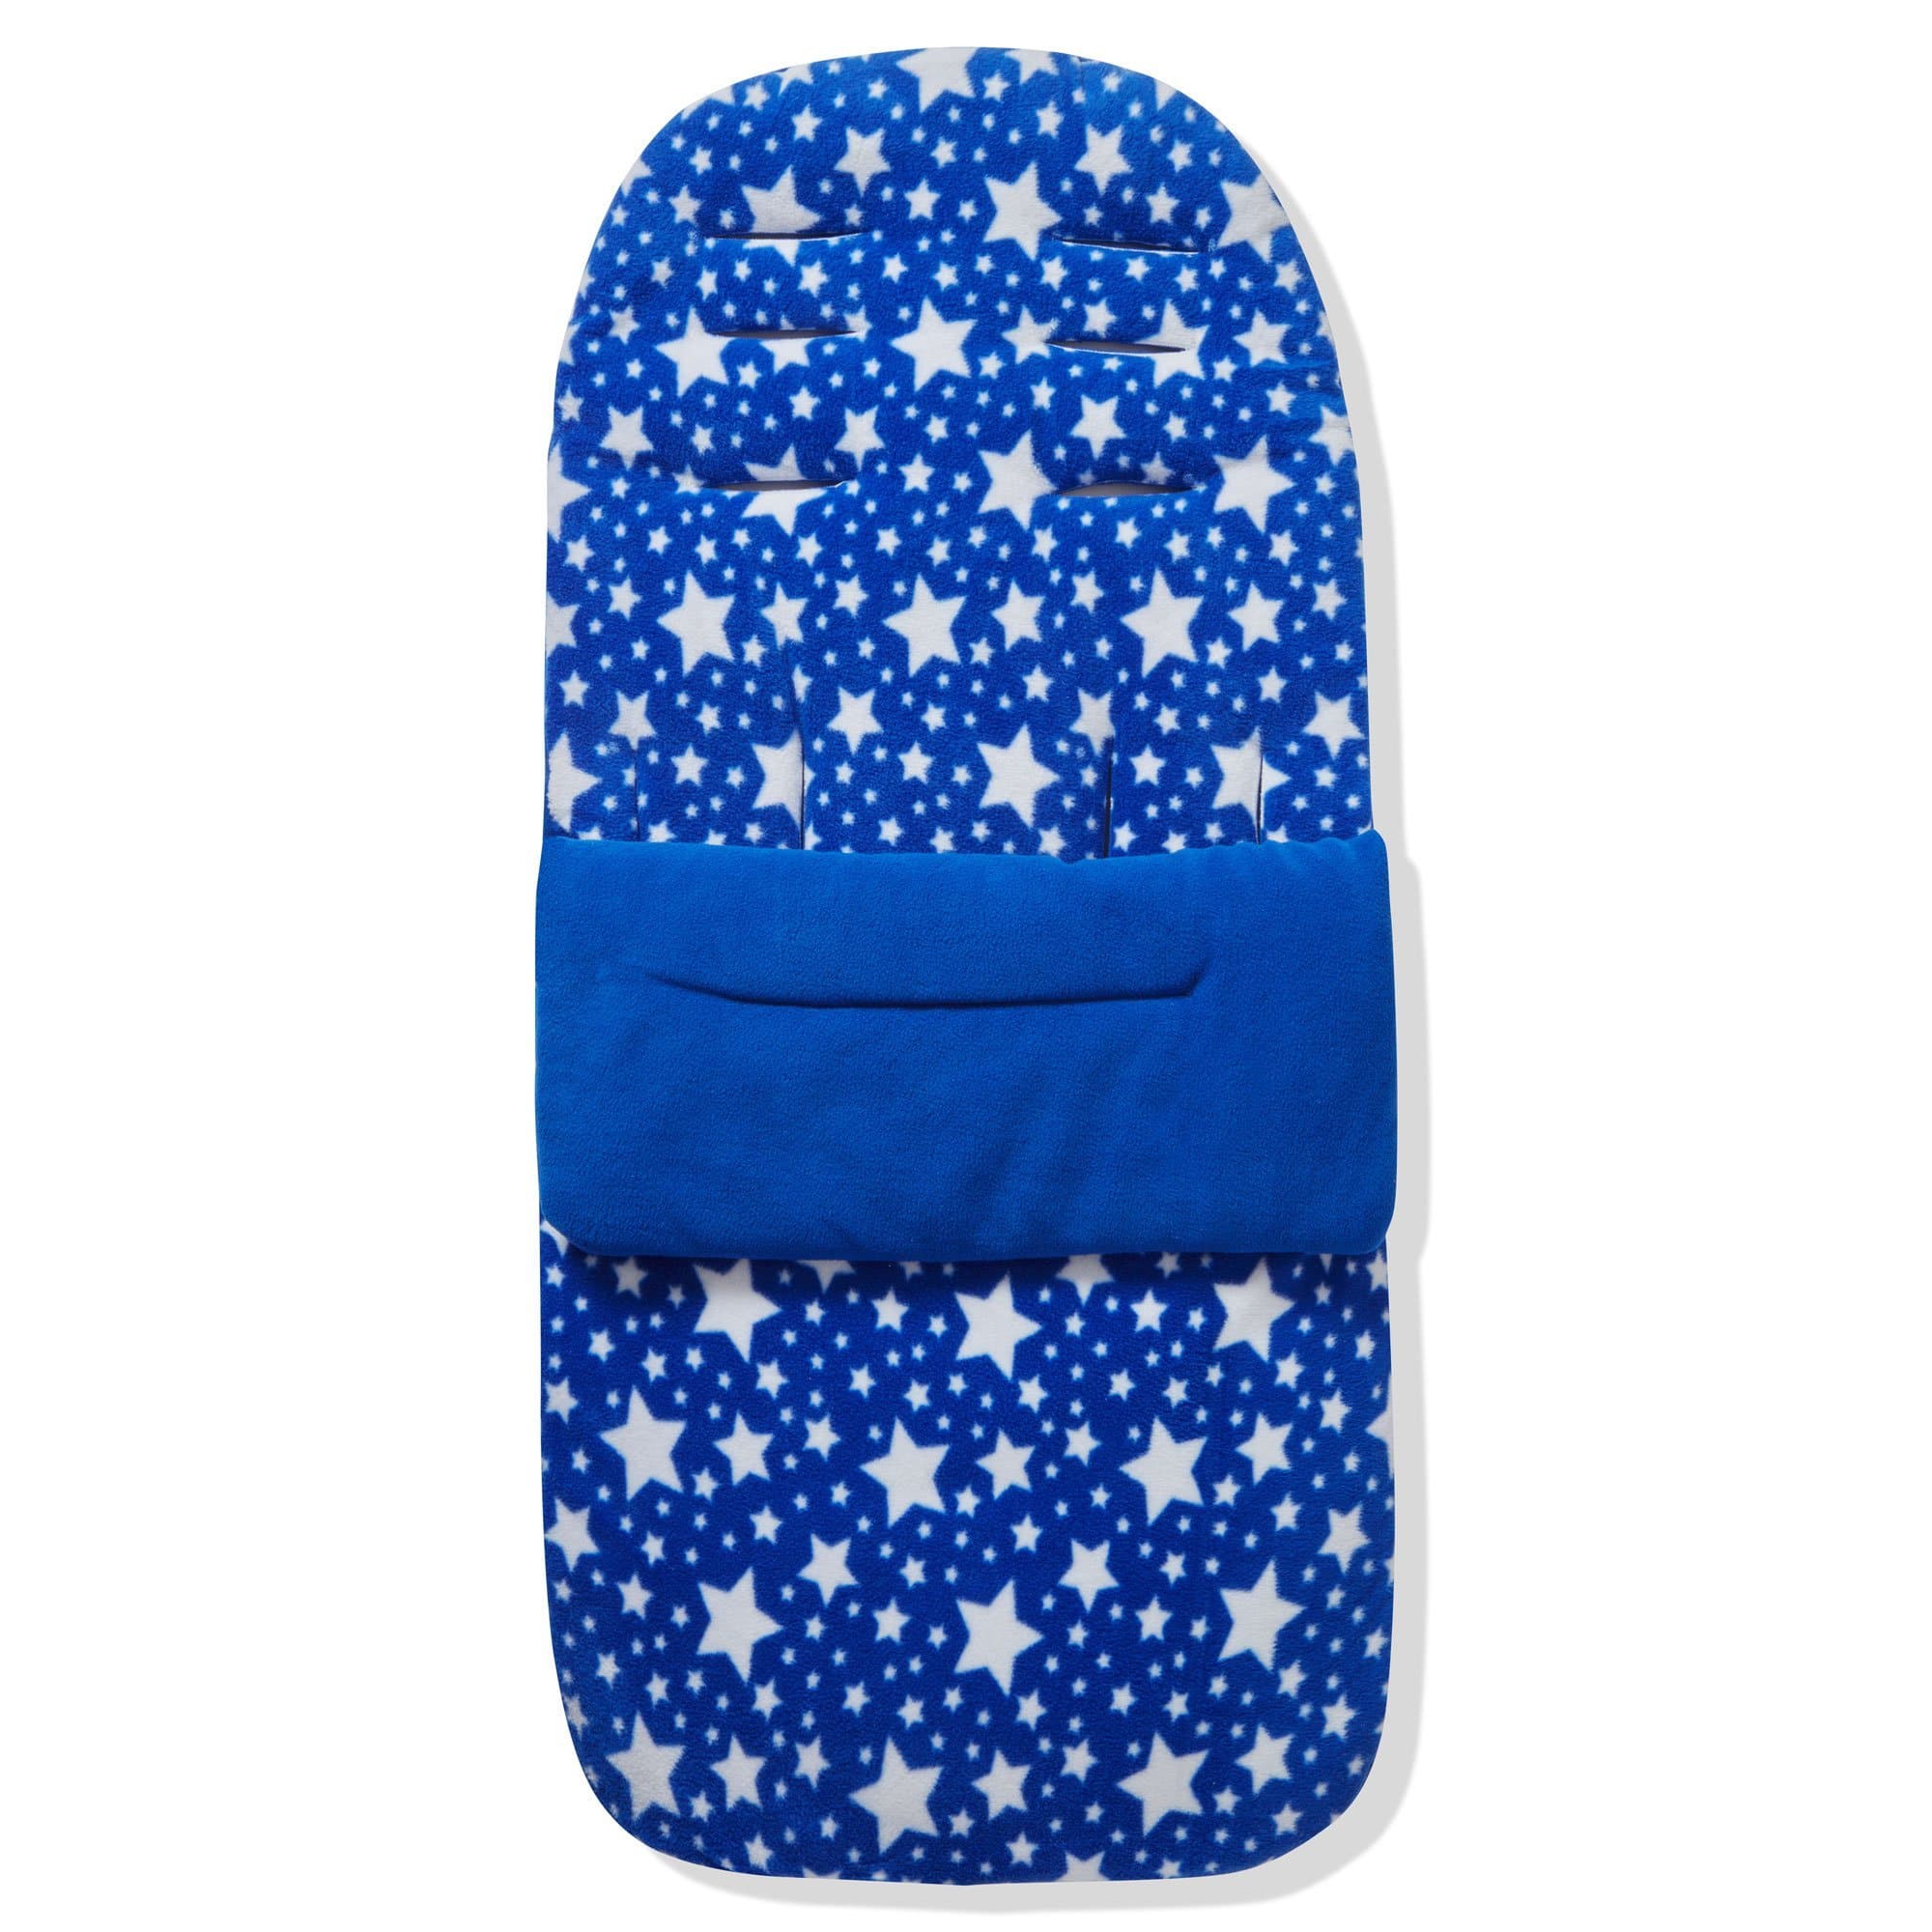 Fleece Footmuff / Cosy Toes Compatible With Baby Jogger - Blue Star / Fits All Models | For Your Little One